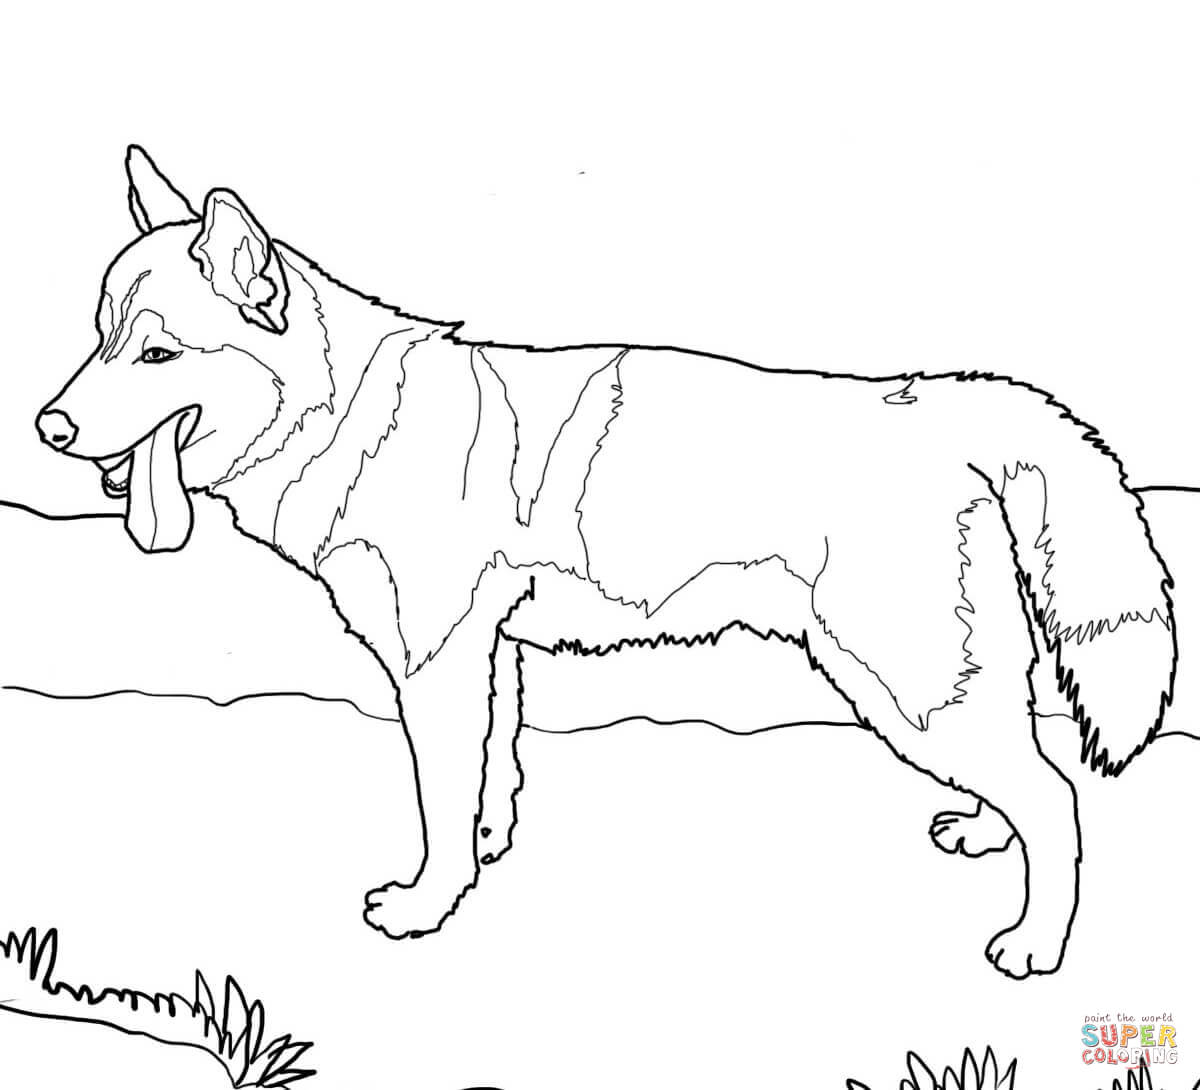 Dachshund Coloring Page Free Printable Coloring Pages Weiner Dog ...